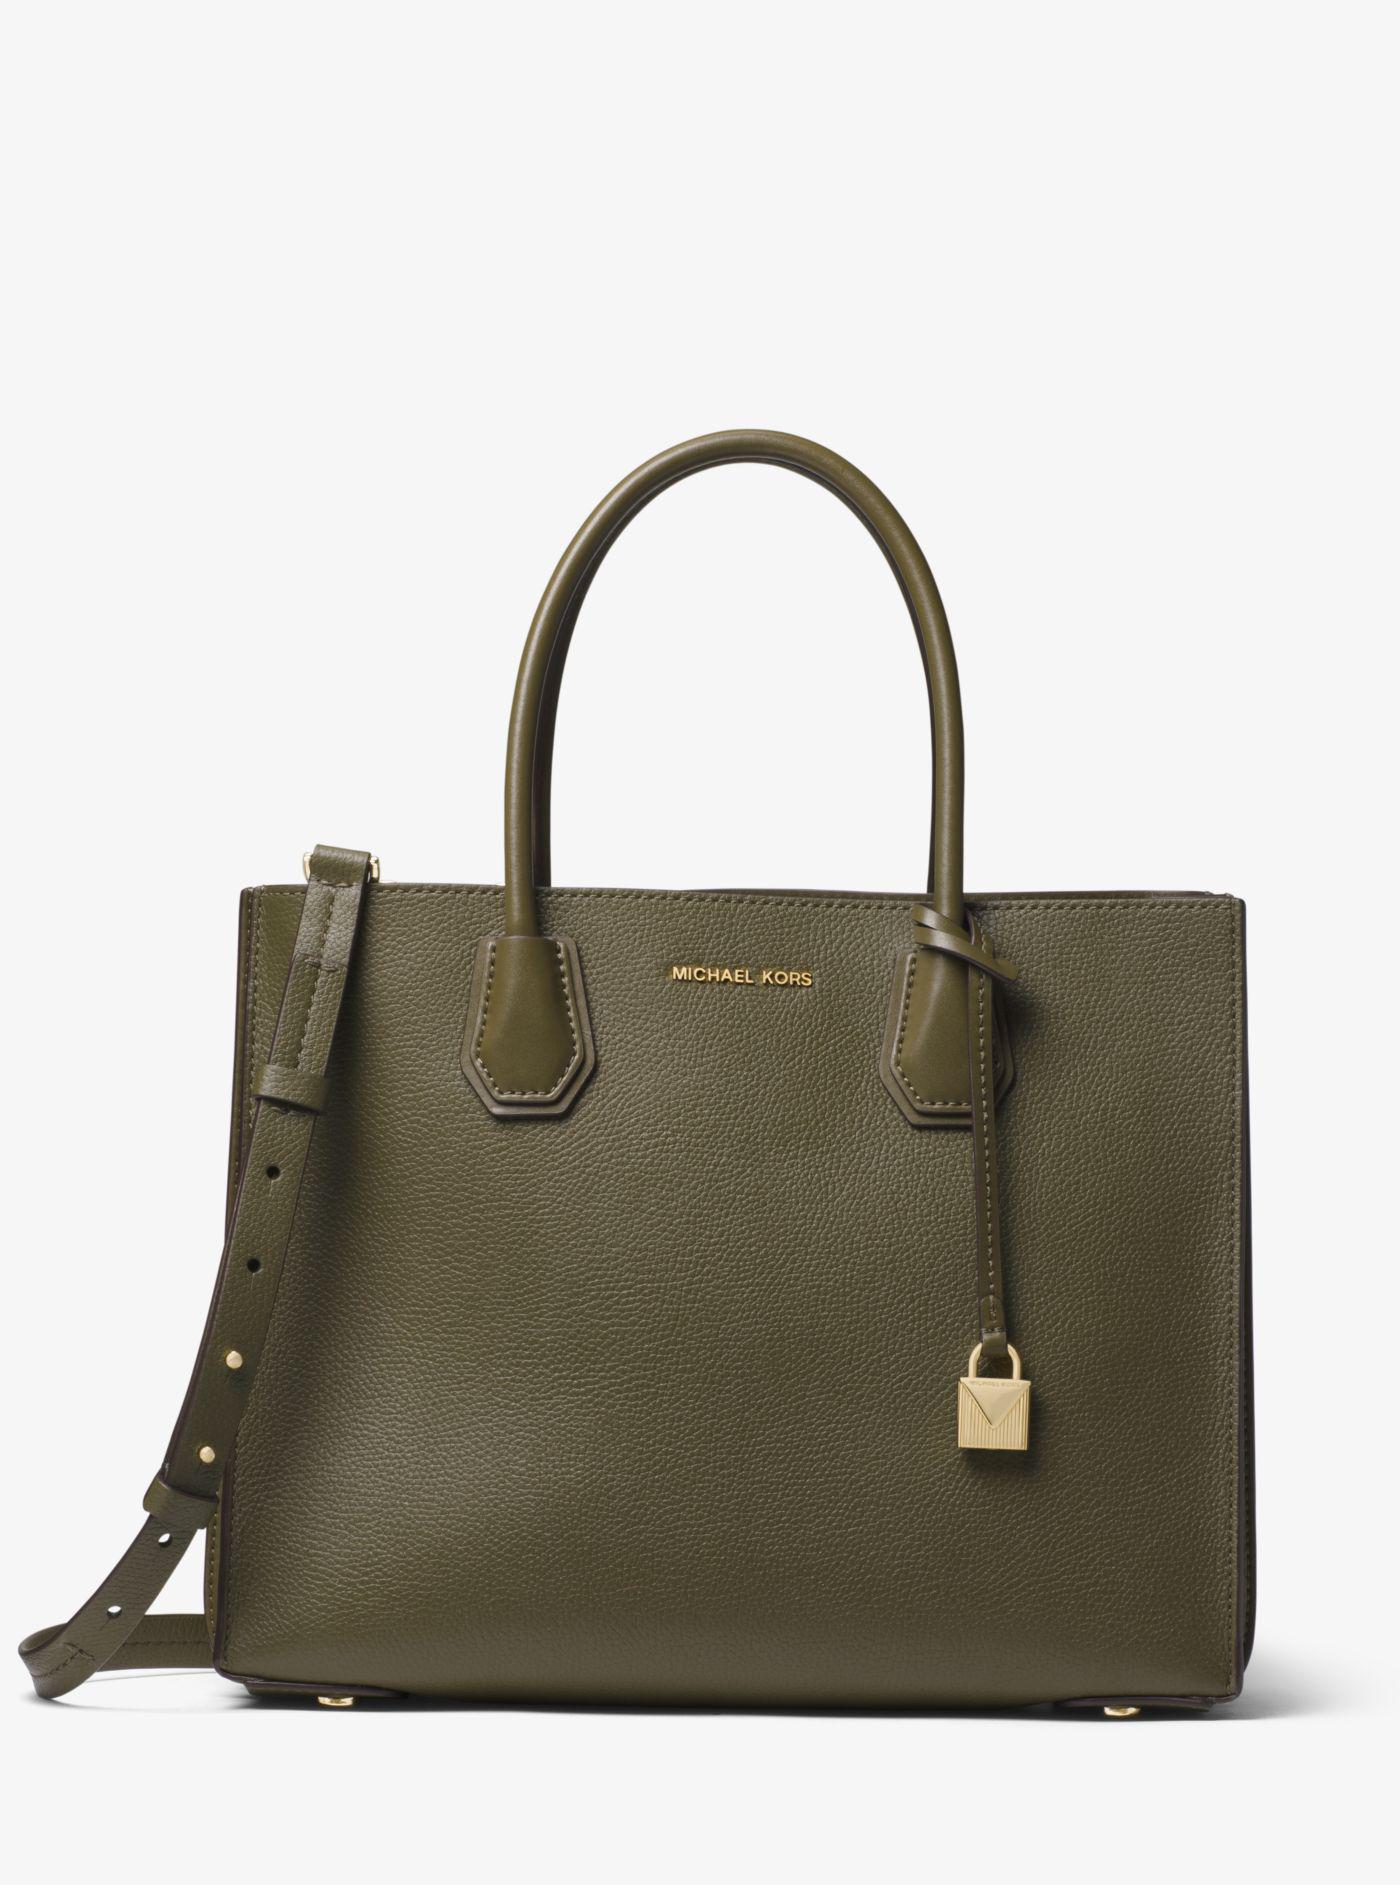 Lyst - Michael Kors Mercer Large Pebbled Leather Accordion Tote in Green